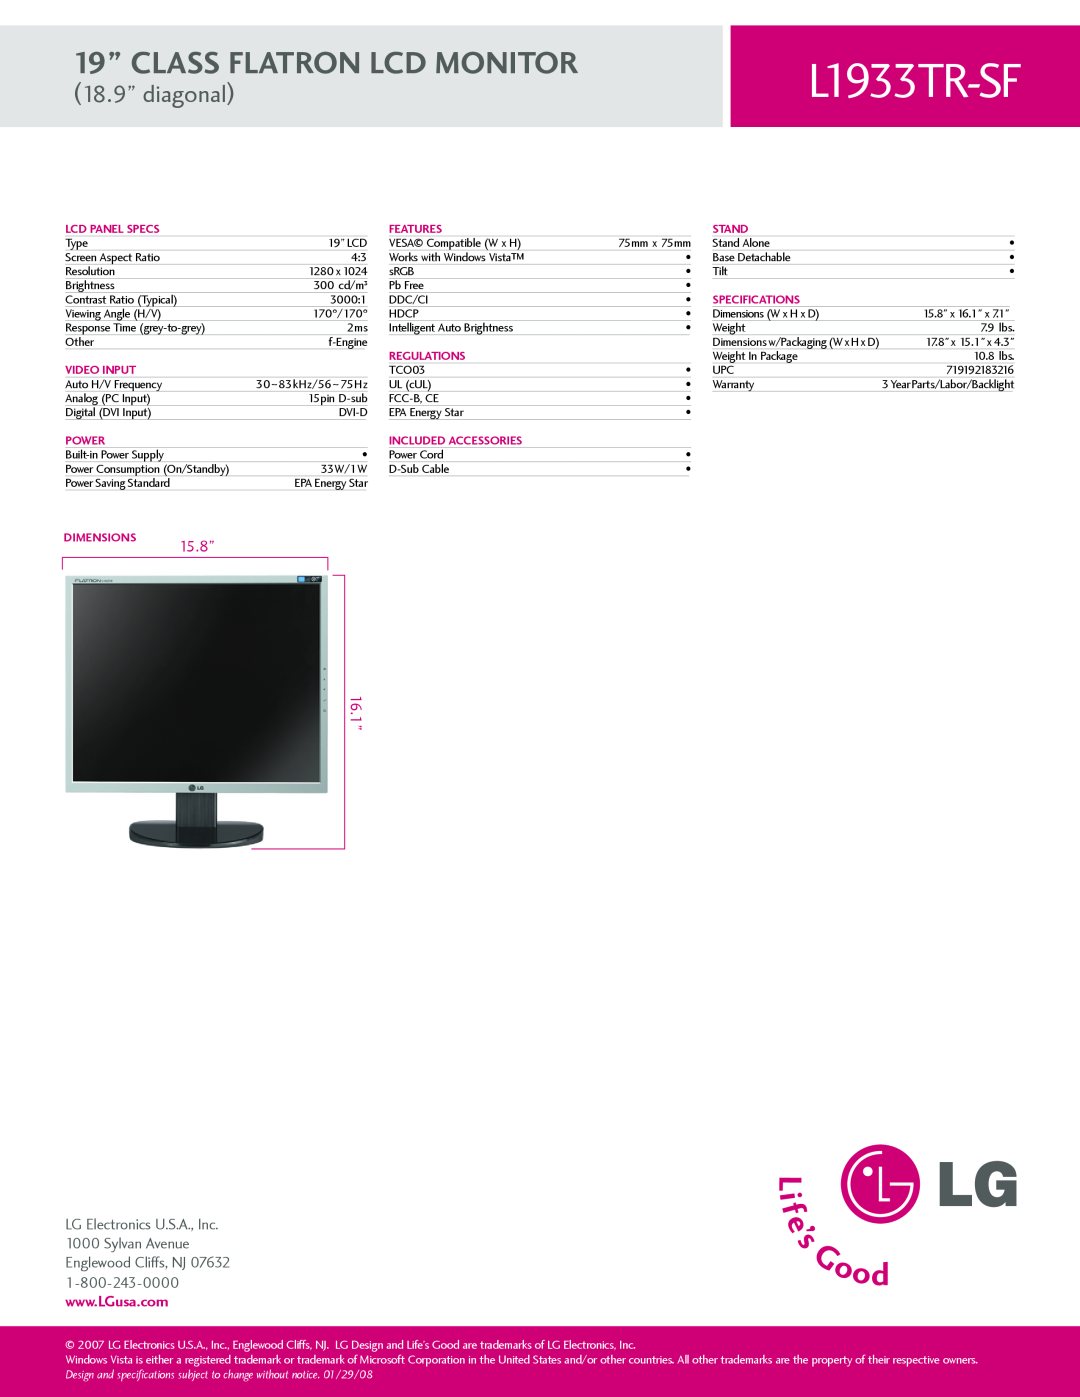 LG Electronics L1933TR-SF 19” CLASS FLATRON LCD MONITOR, 18.9” diagonal, 16.1”, 15.8”, Lcd Panel Specs, Features, Stand 